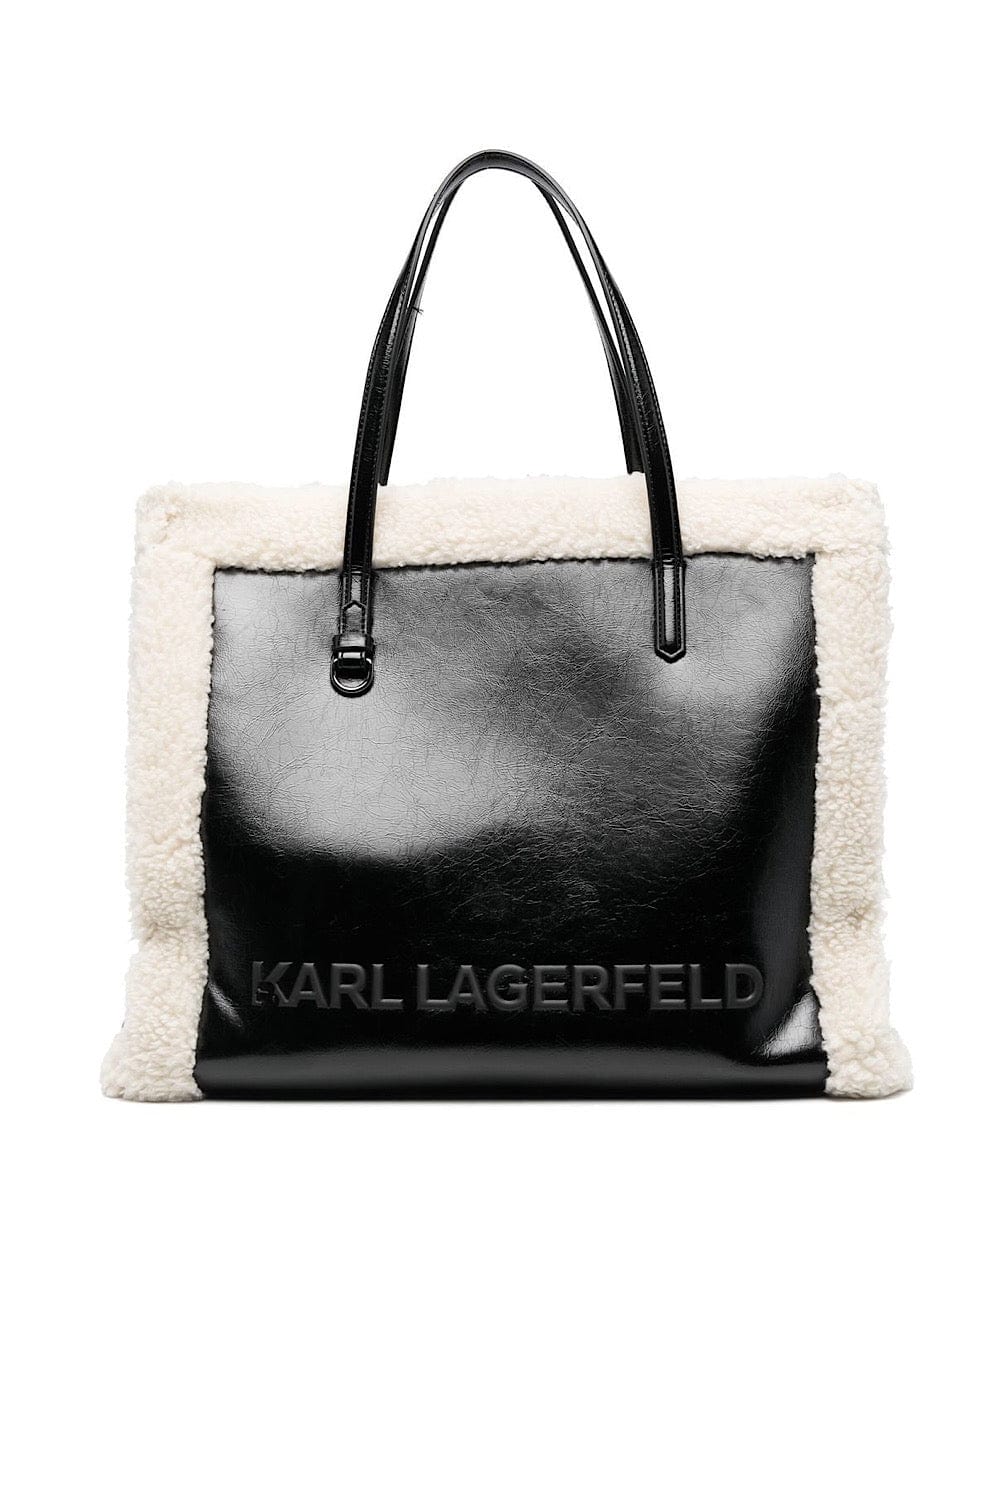 Karl Lagerfeld Tote Bags Clearance Sale  Black KDisk Small Womens